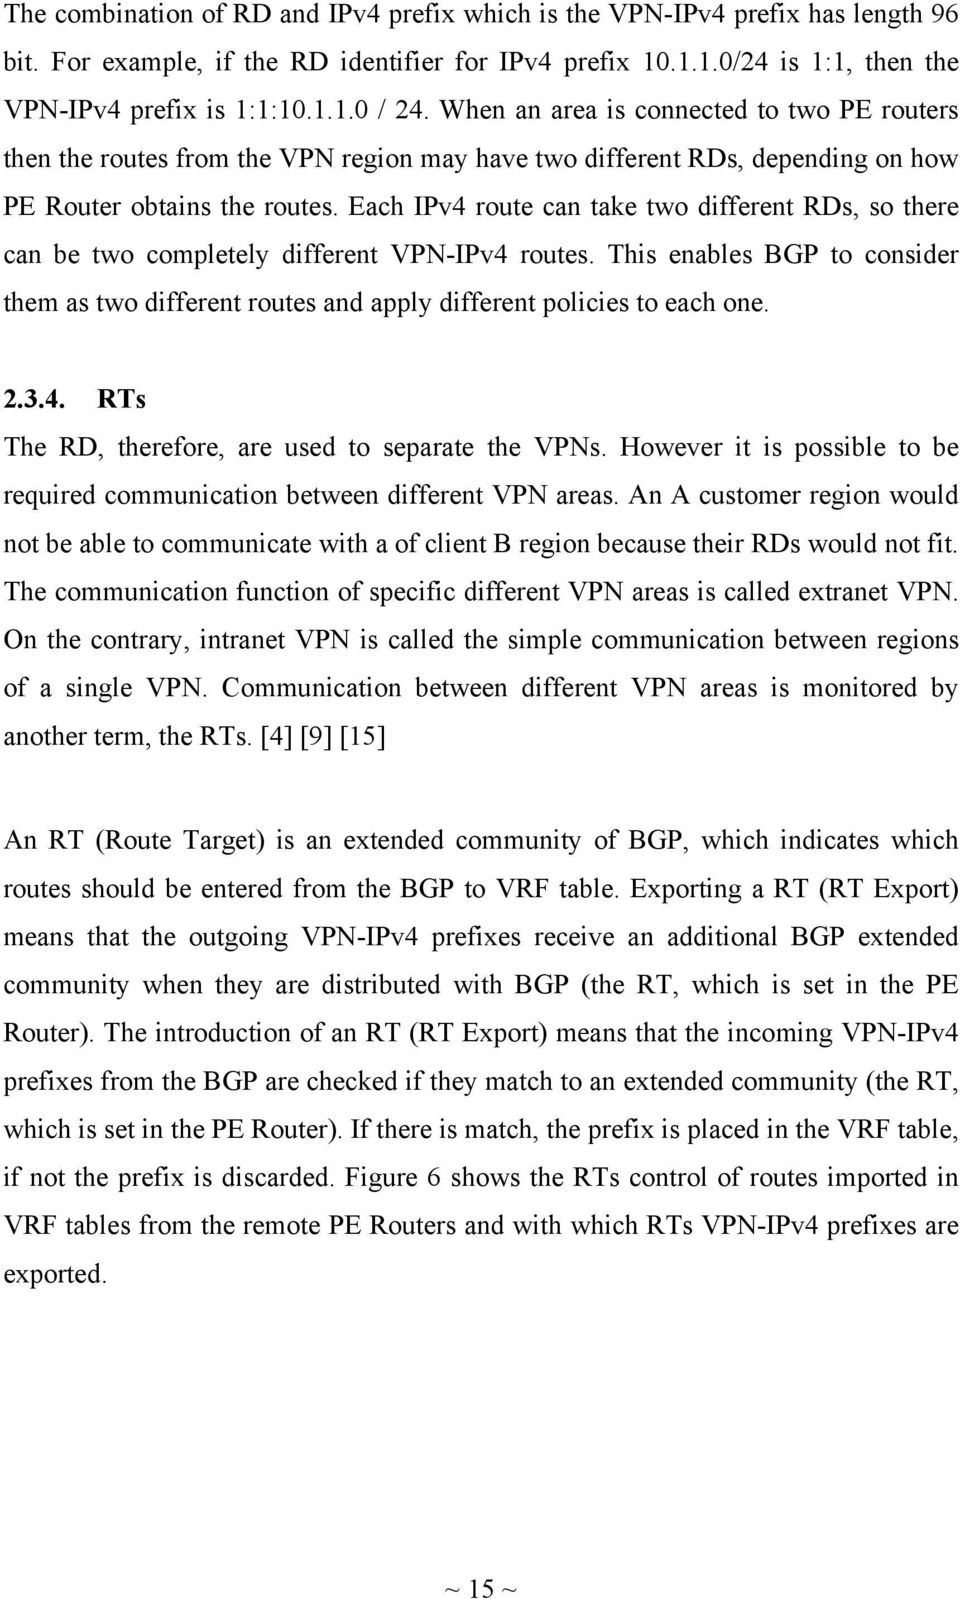 Each IPv4 route can take two different RDs, so there can be two completely different VPN-IPv4 routes.